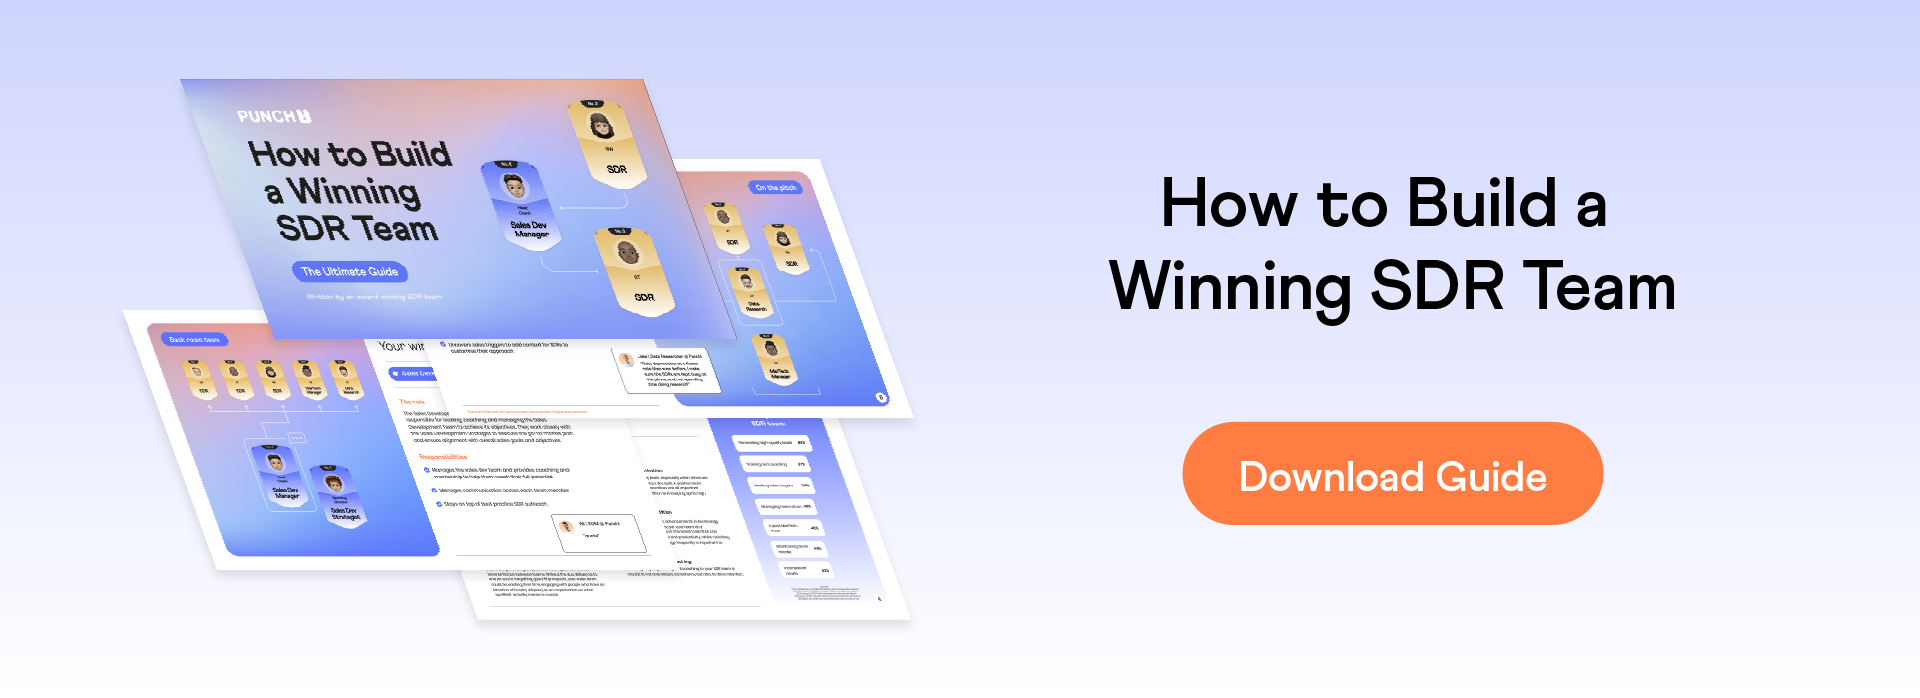 How to Build a Winning SDR Team Guide